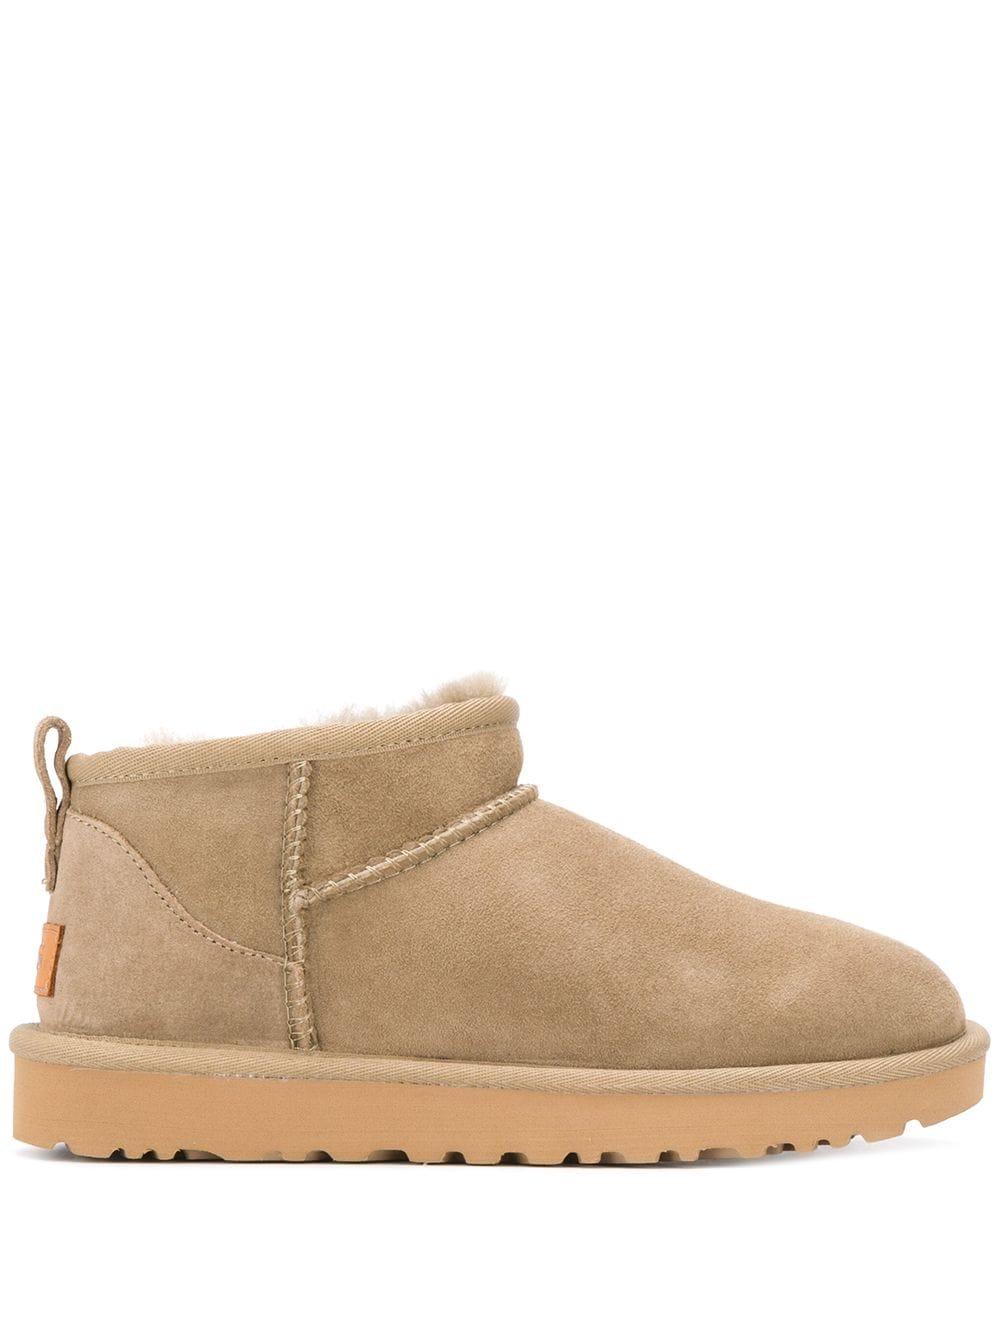 UGG Leather Classic Ultra Mini Boot Antilope in Beige (Brown) - Save 52% |  Lyst